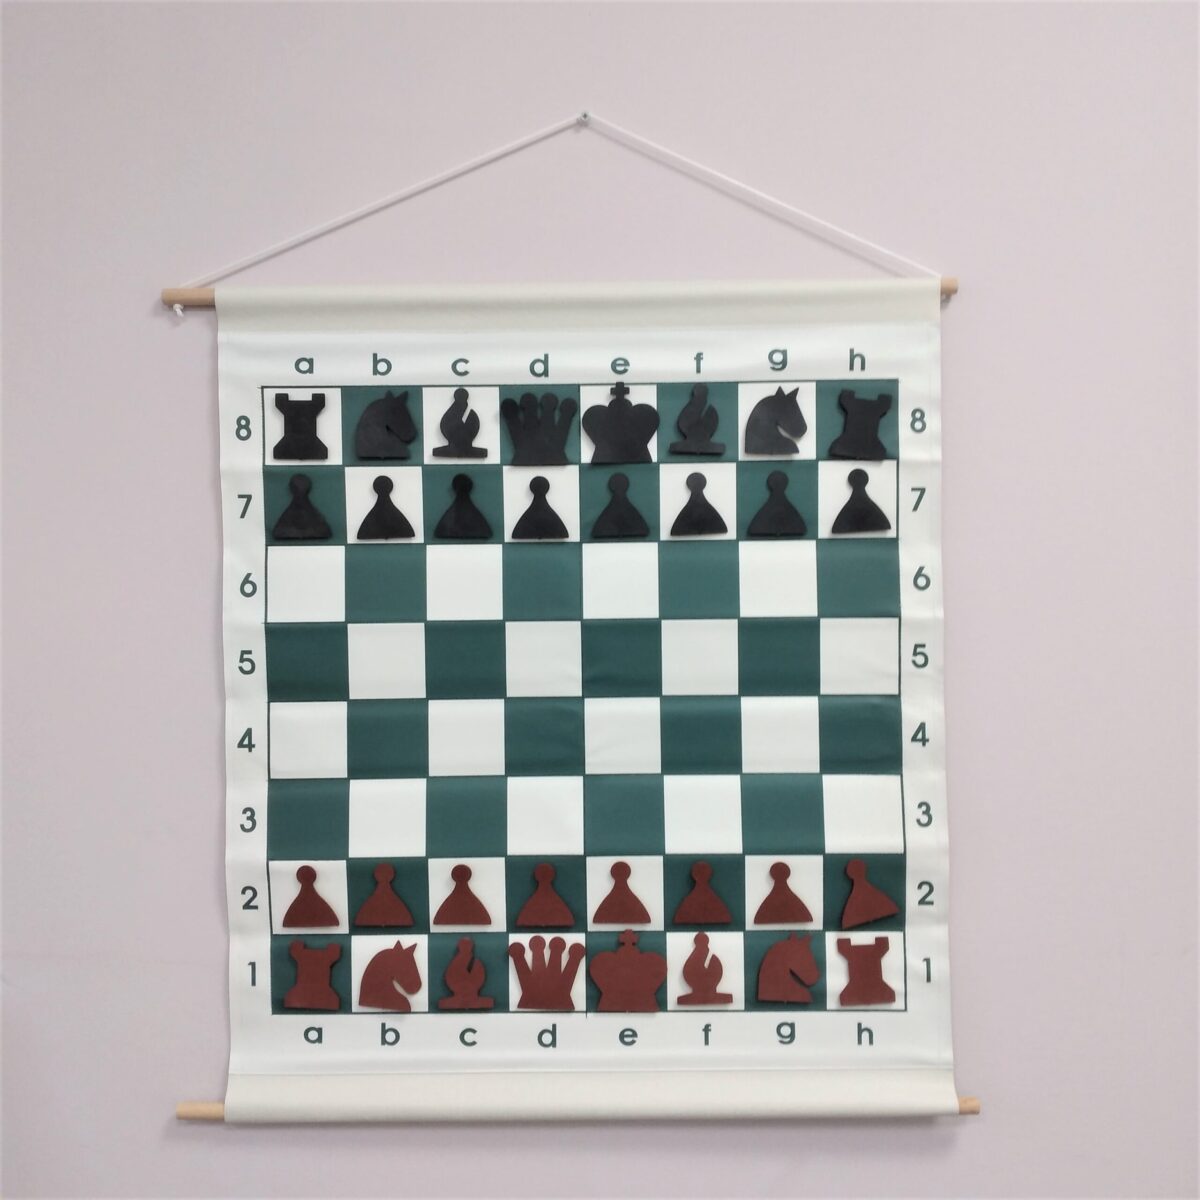 Roll-up Magnetic Chess Demo Board